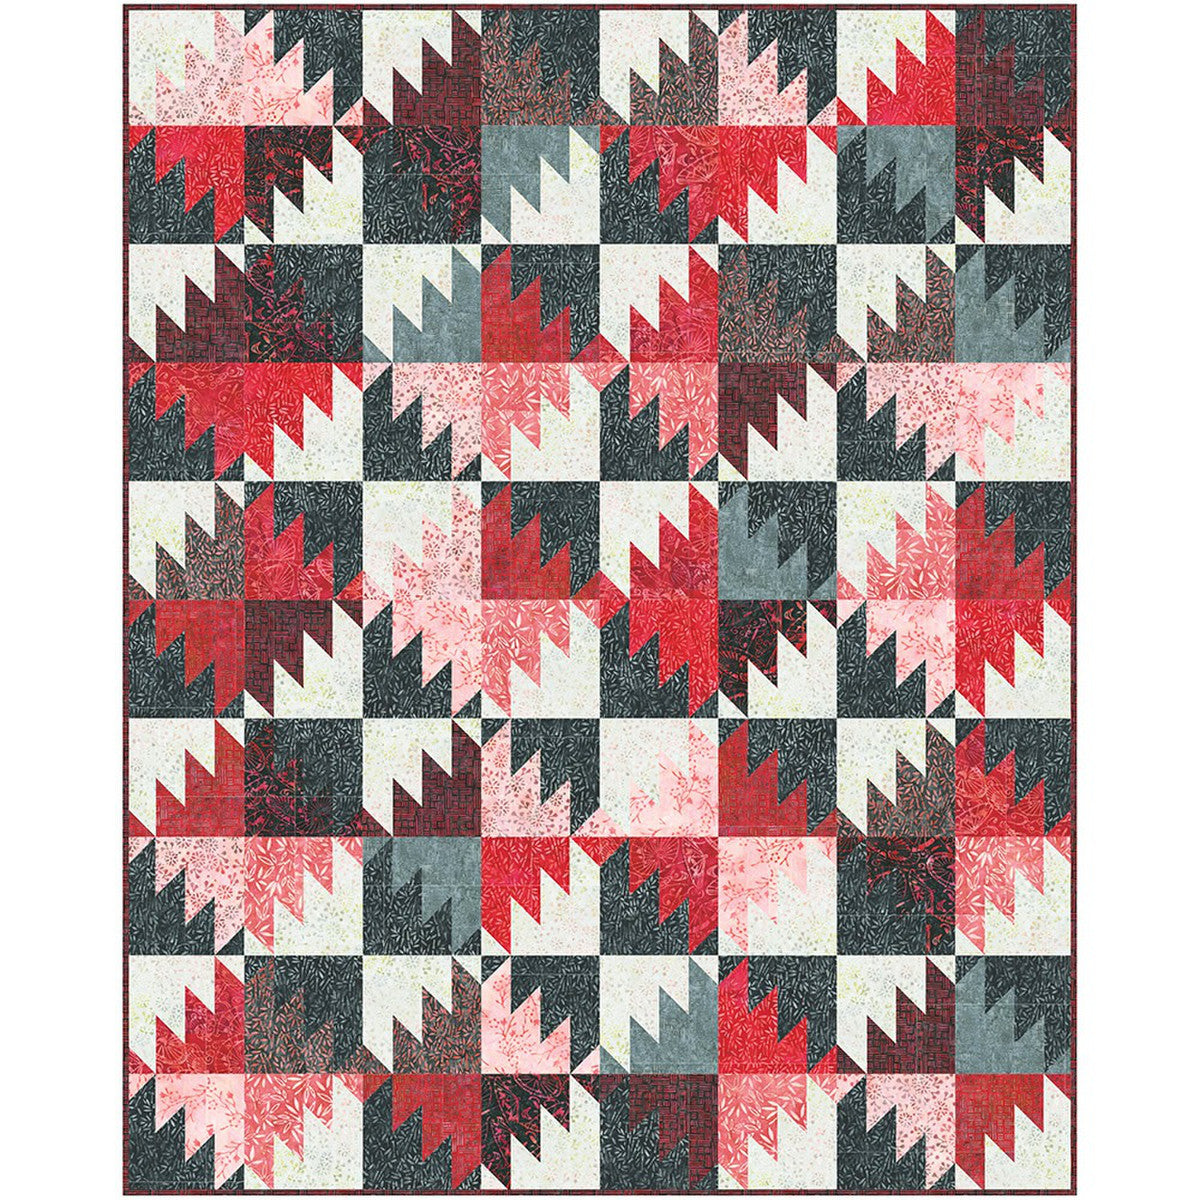 Delectable Blooms Quilt Pattern - Free Digital Download